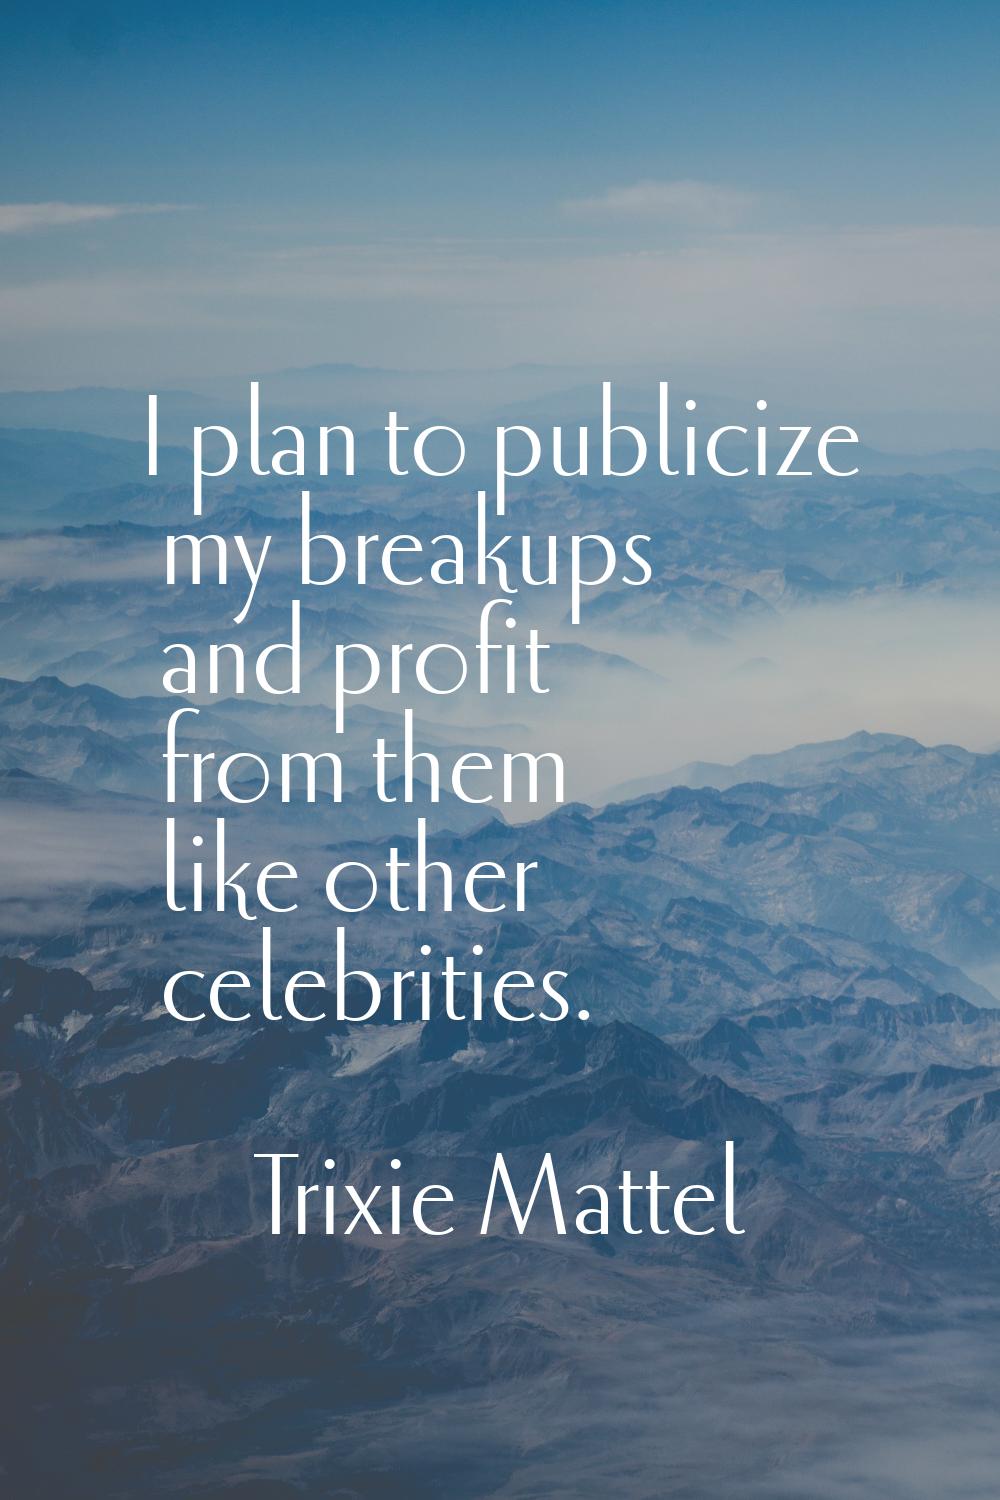 I plan to publicize my breakups and profit from them like other celebrities.